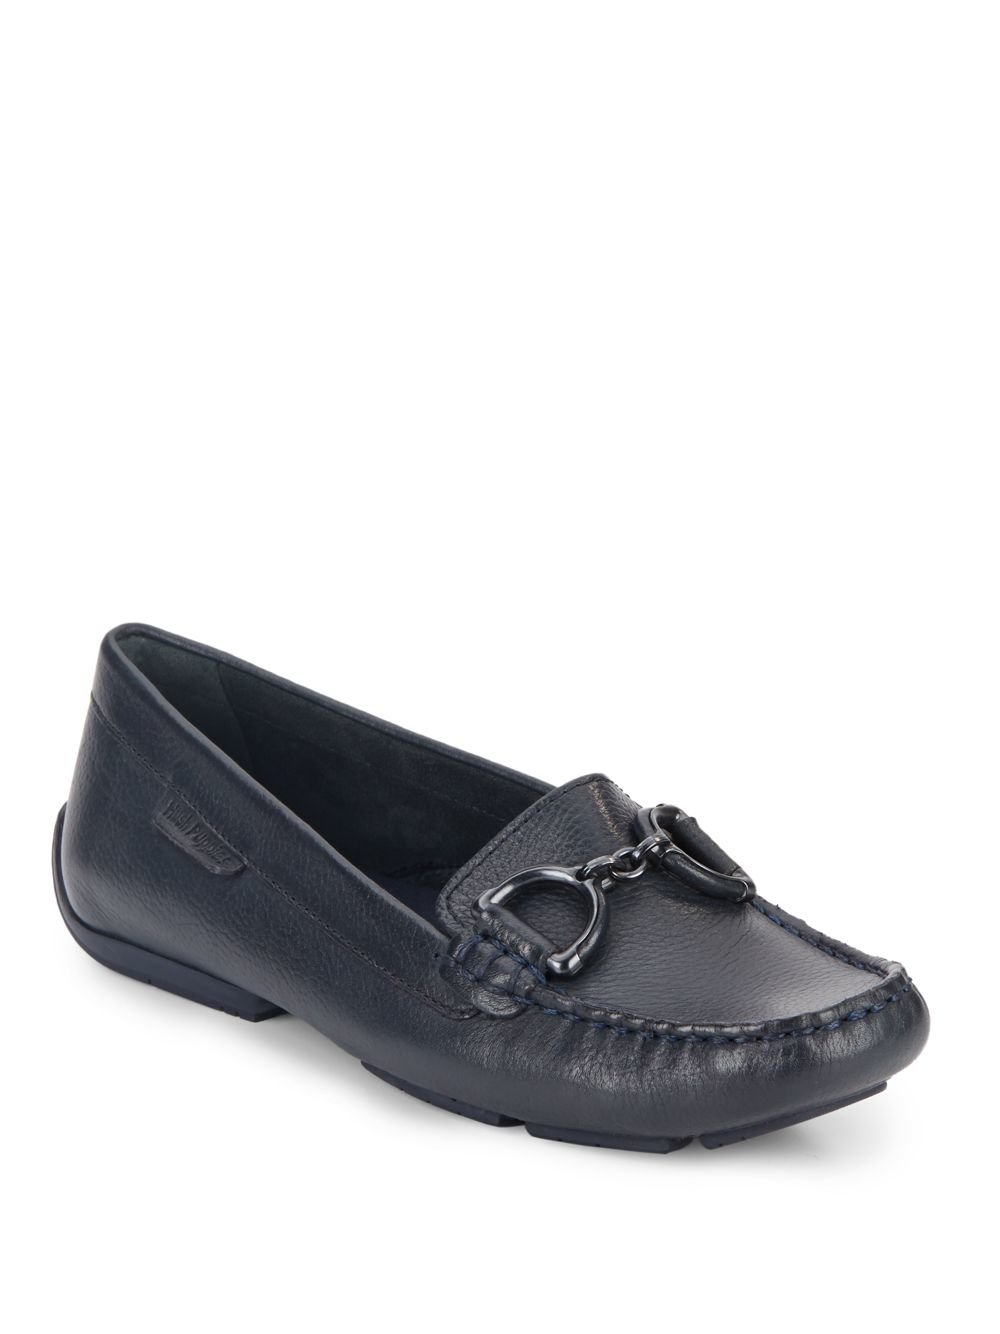 Hush puppies Cora Leather Loafers in Blue (navy) - Save 53% | Lyst